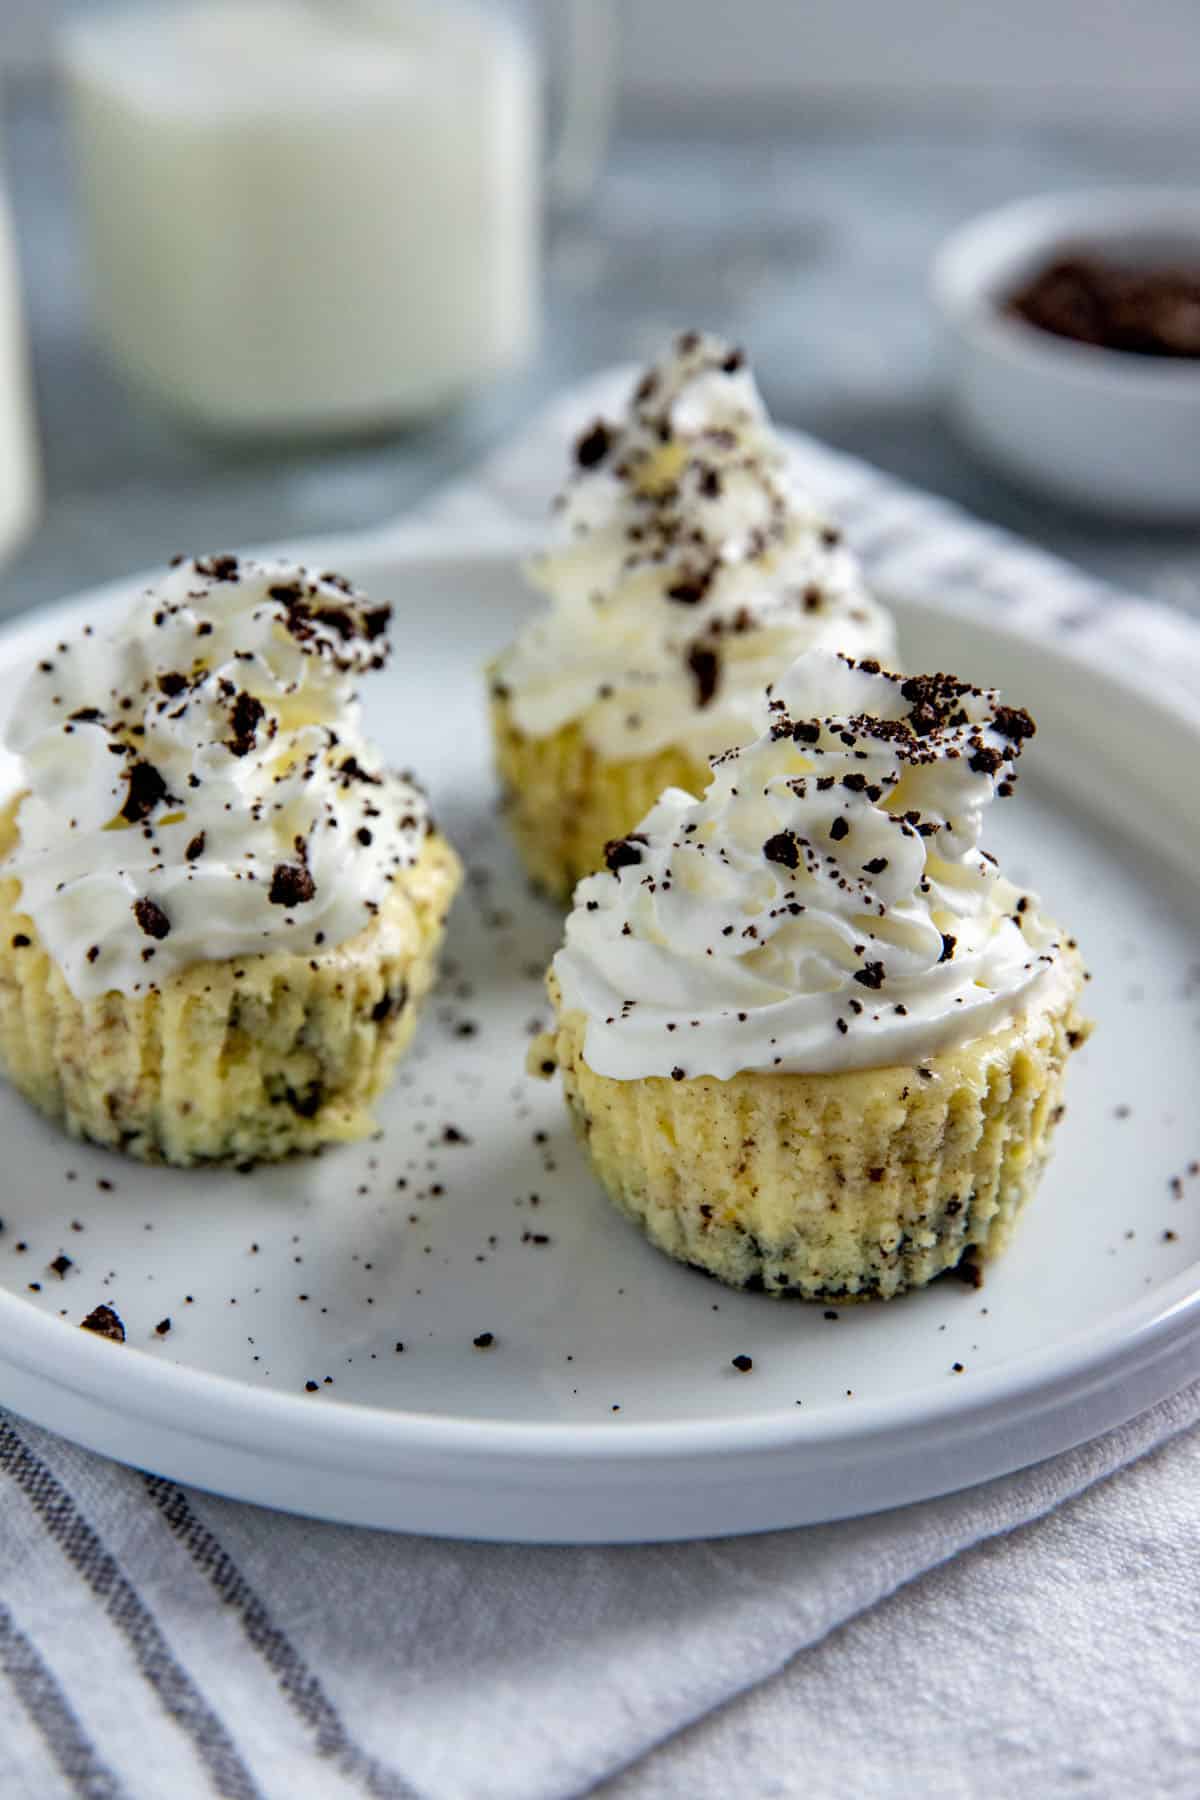 Three mini cheesecakes with whipped cream topping and Oreo crumbs sprinked on top.  Cheesecakes on white plate with cup of milk in background and a small bowl of crushed Oreo cookies.